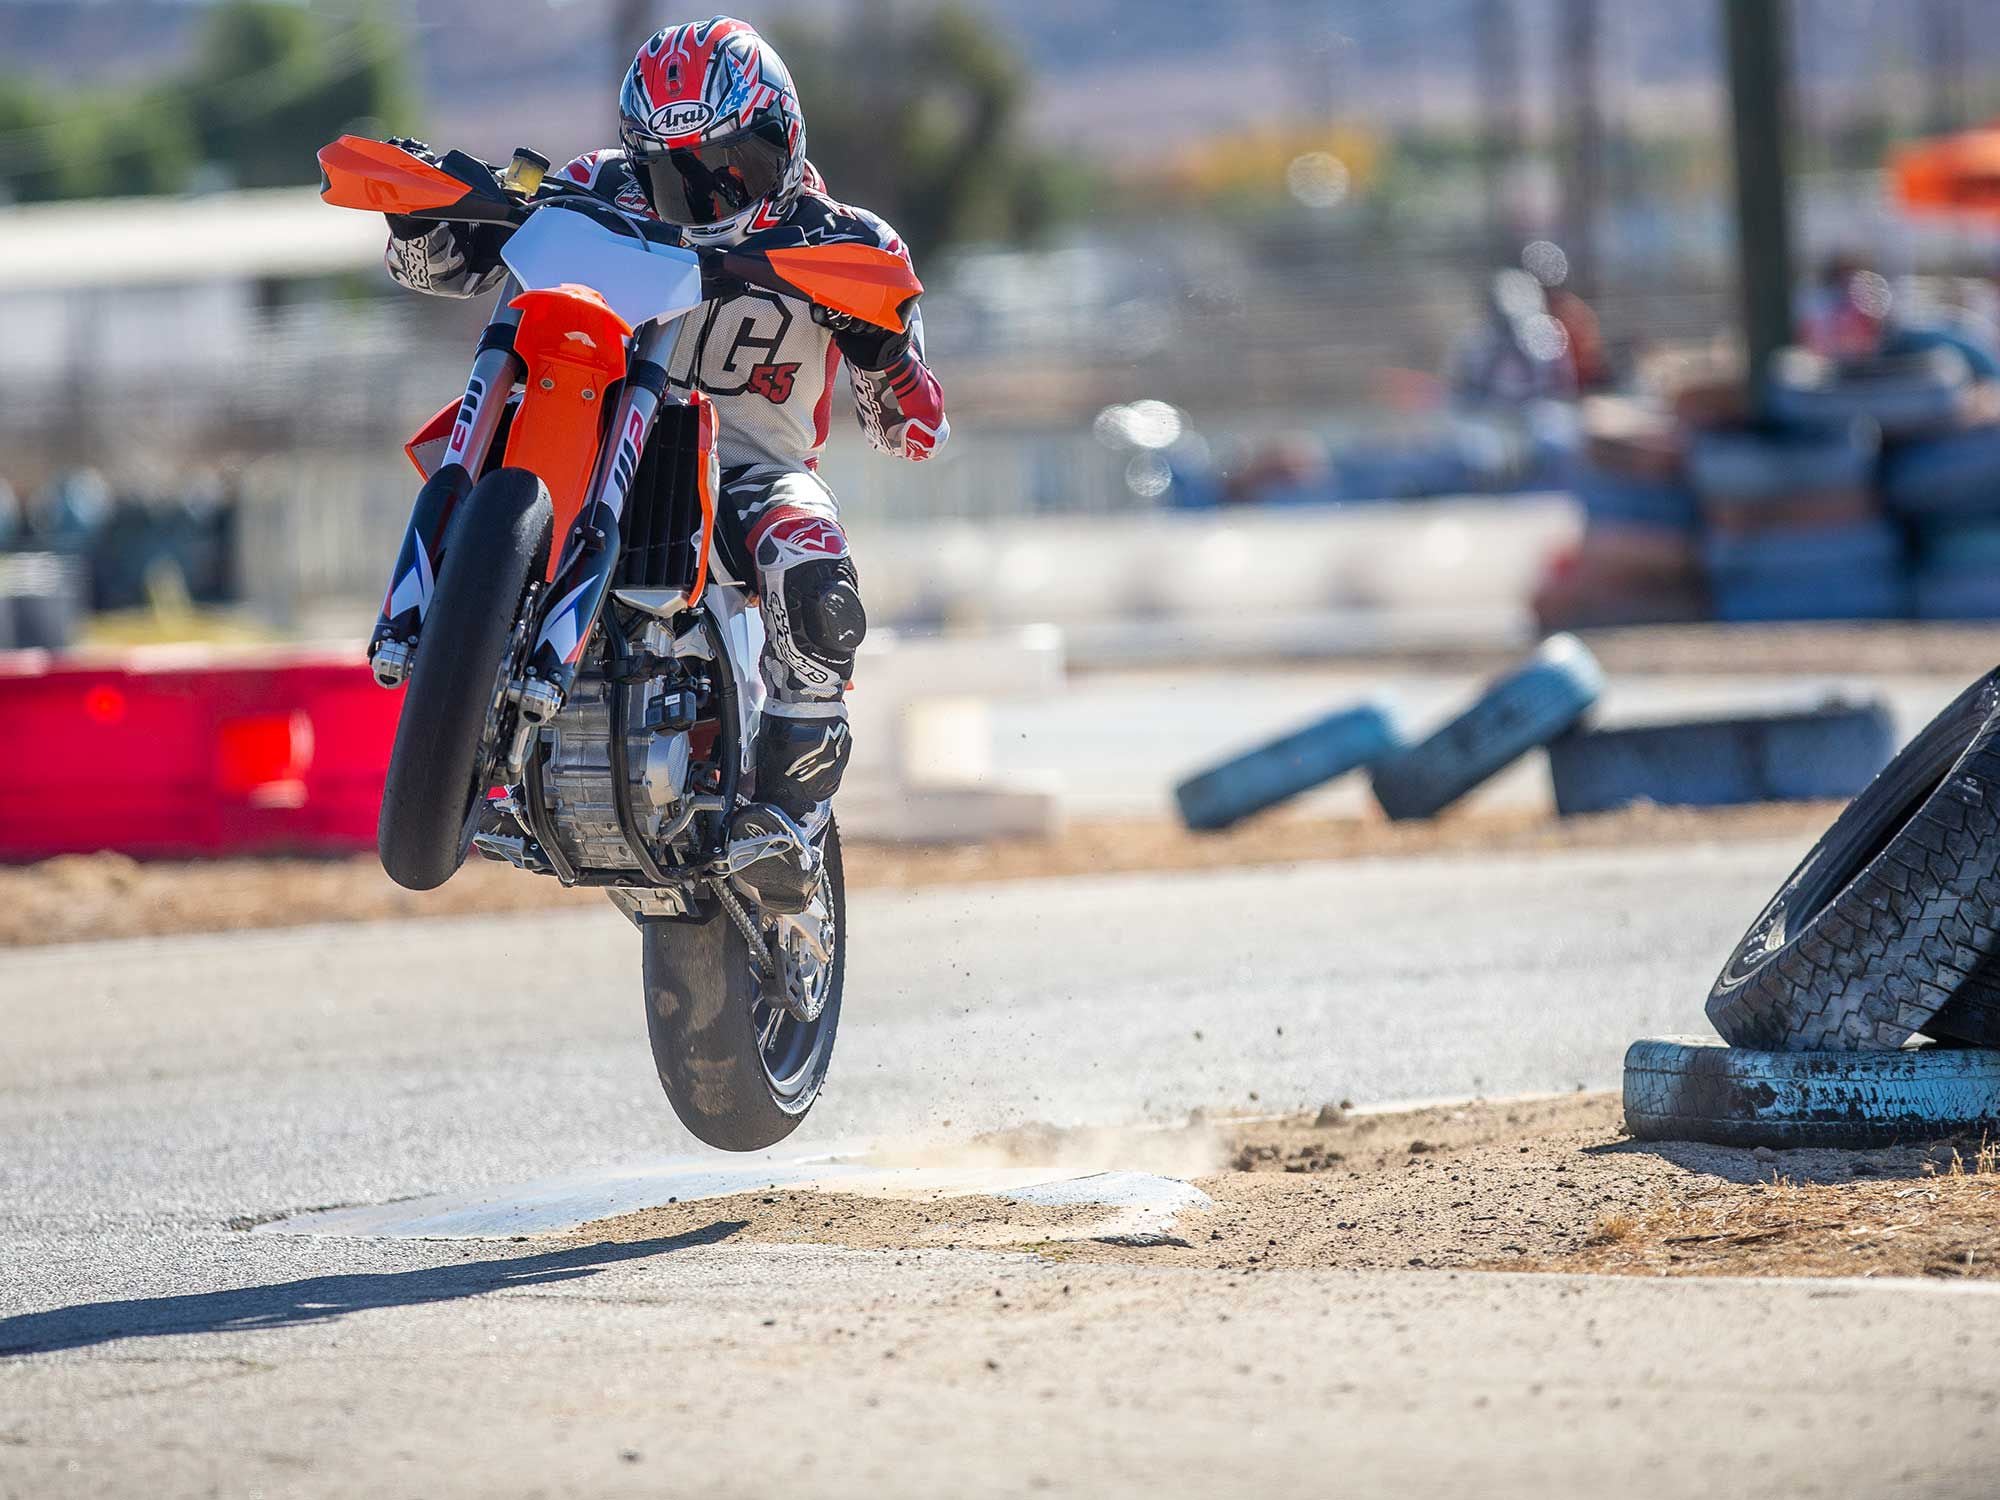 Fun? Ridiculously. Supermoto might be the epitome of hooliganism on two wheels, but also serves as a relatively inexpensive alternative to trackdays.